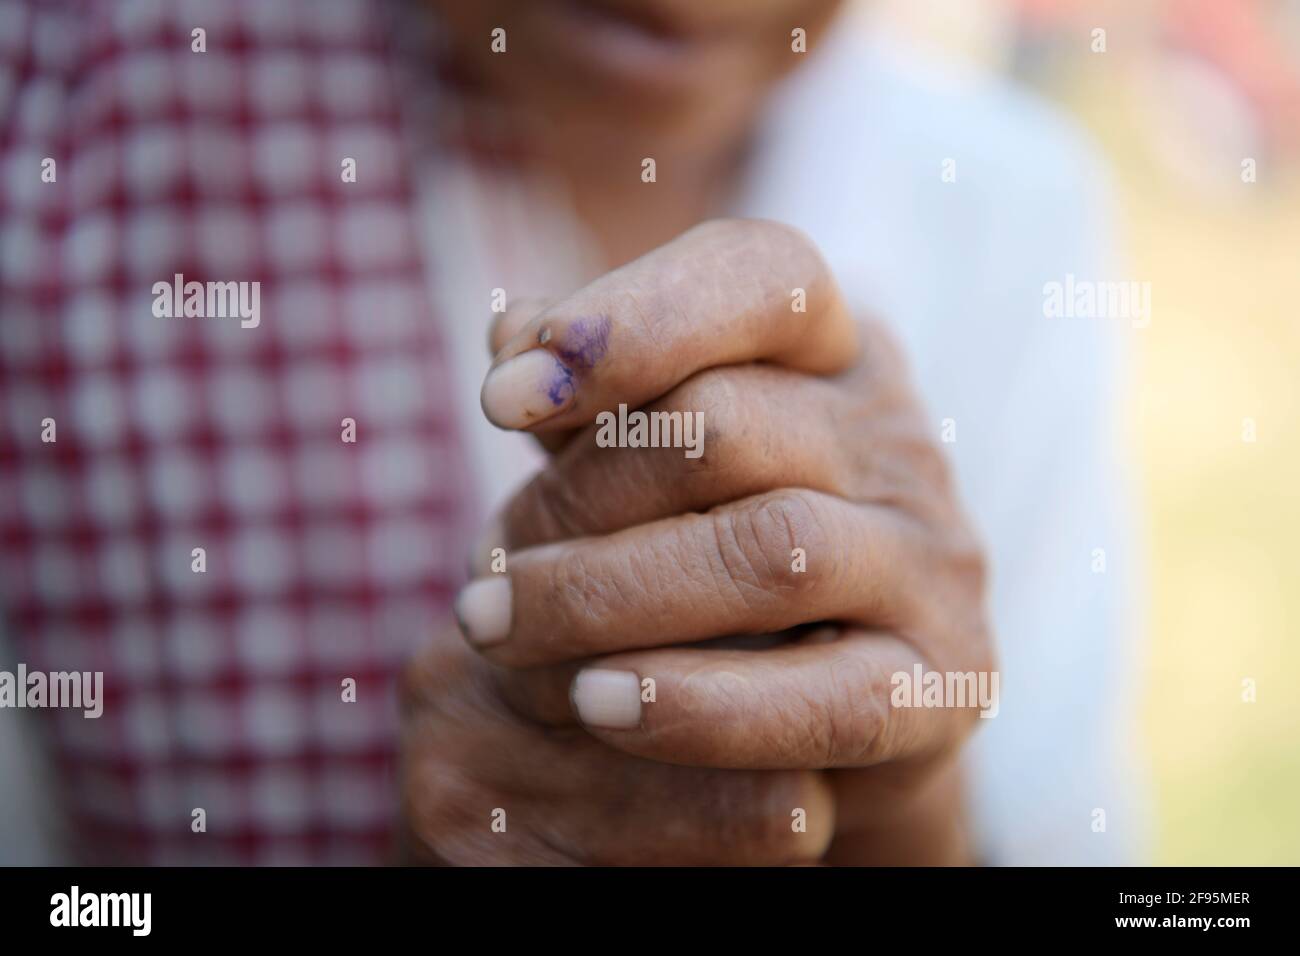 Abhisek Saha / Le Pictorium -  TTAADC elections -  6/4/2021  -  India / Tripura / Agartala  -  A  Tribal woman shows her finger marked with ink after Stock Photo